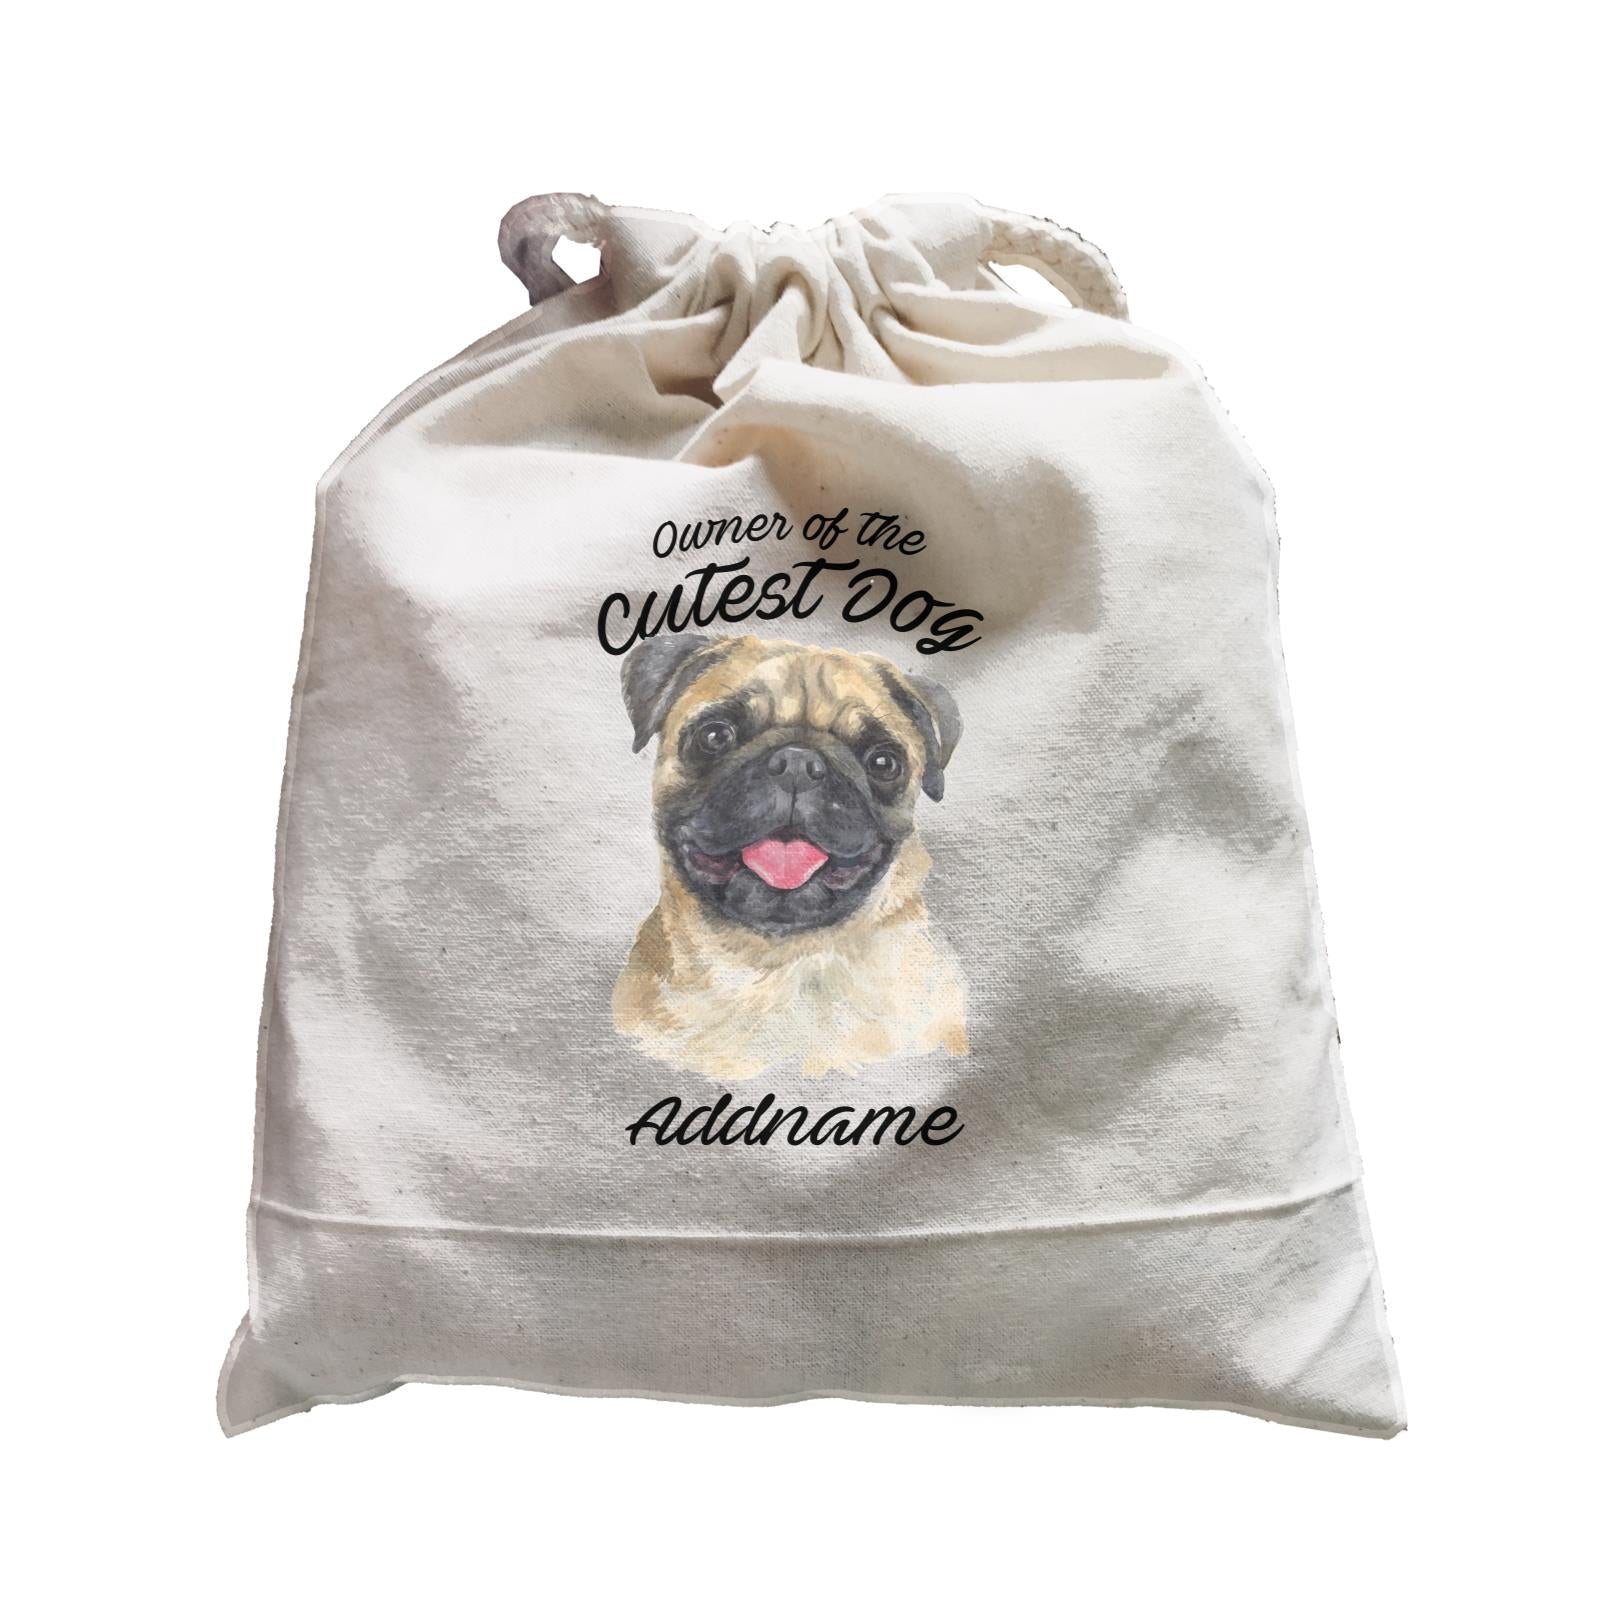 Watercolor Dog Owner Of The Cutest Dog Pug Addname Satchel